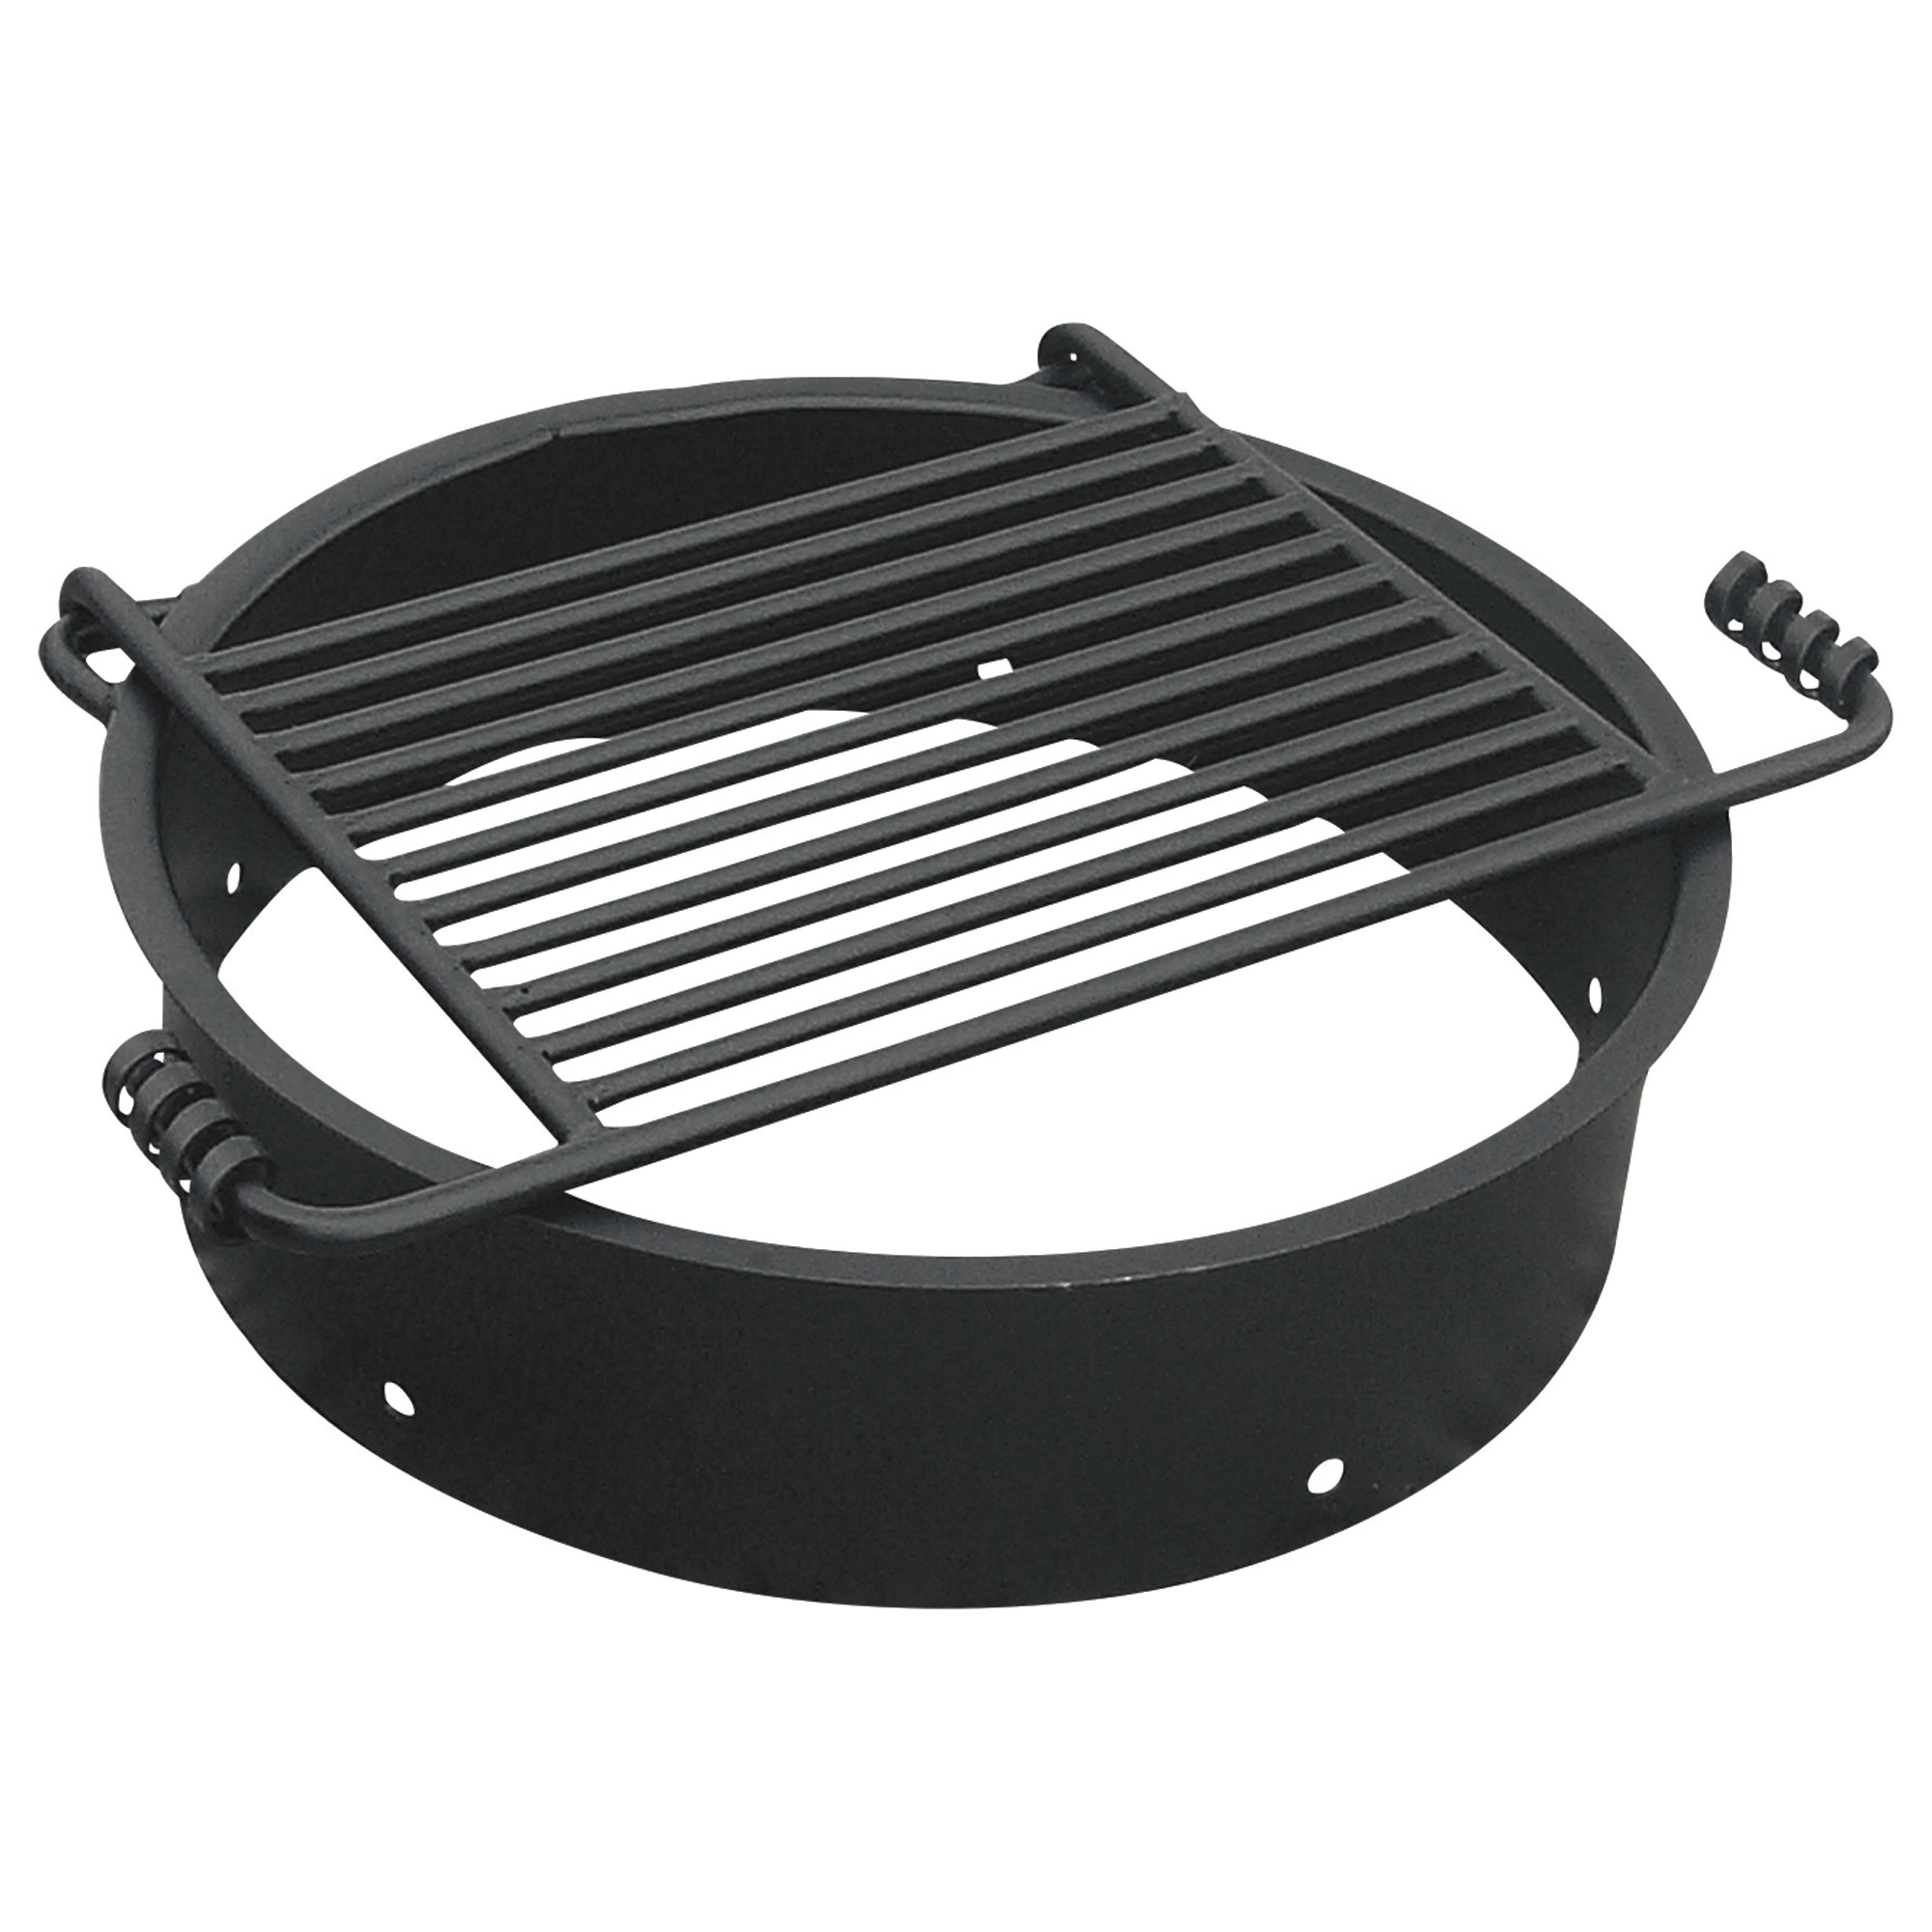 Pilot Rock Steel Fire Ring with Cooking Grate â 24Inch Diameter, Model FS-24/6